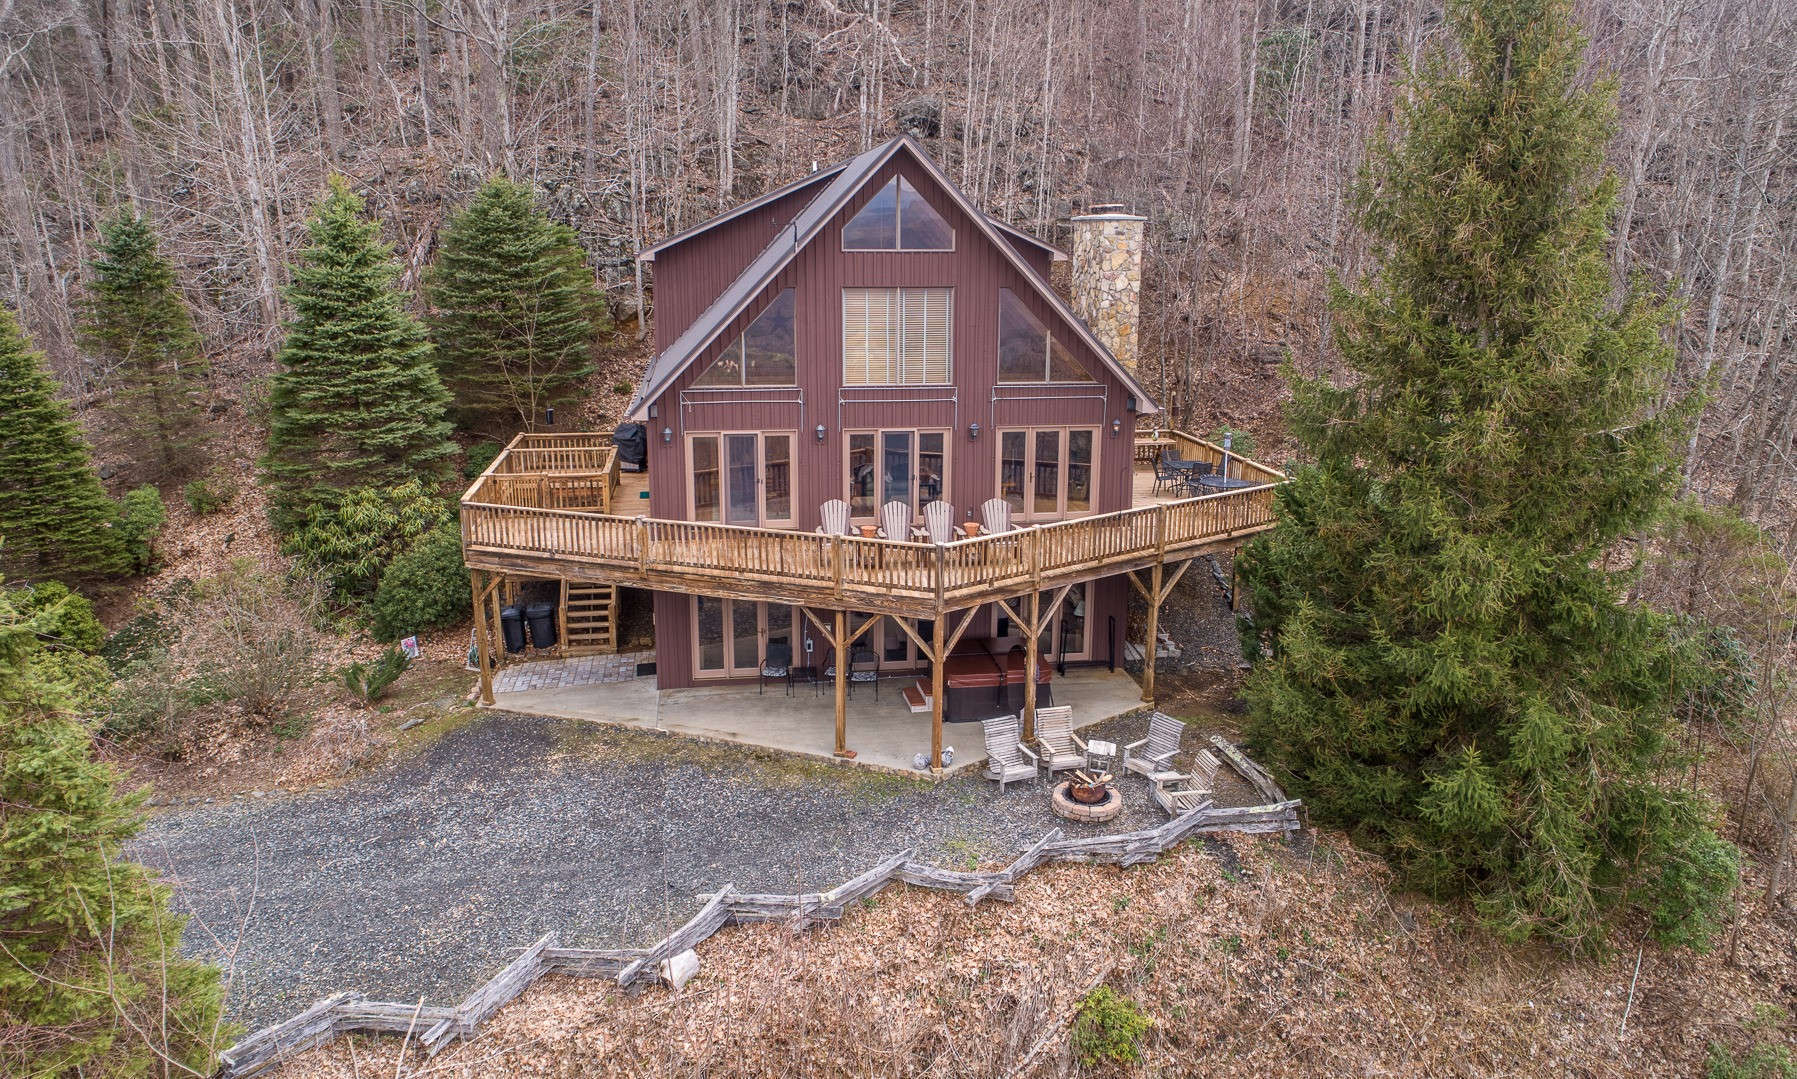 Majestically sited on a 15.92 acre setting for maximum privacy and views, this stunning Blue Ridge Mountain chalet  estate embraces all of Nature's wonder and  true mountain living.